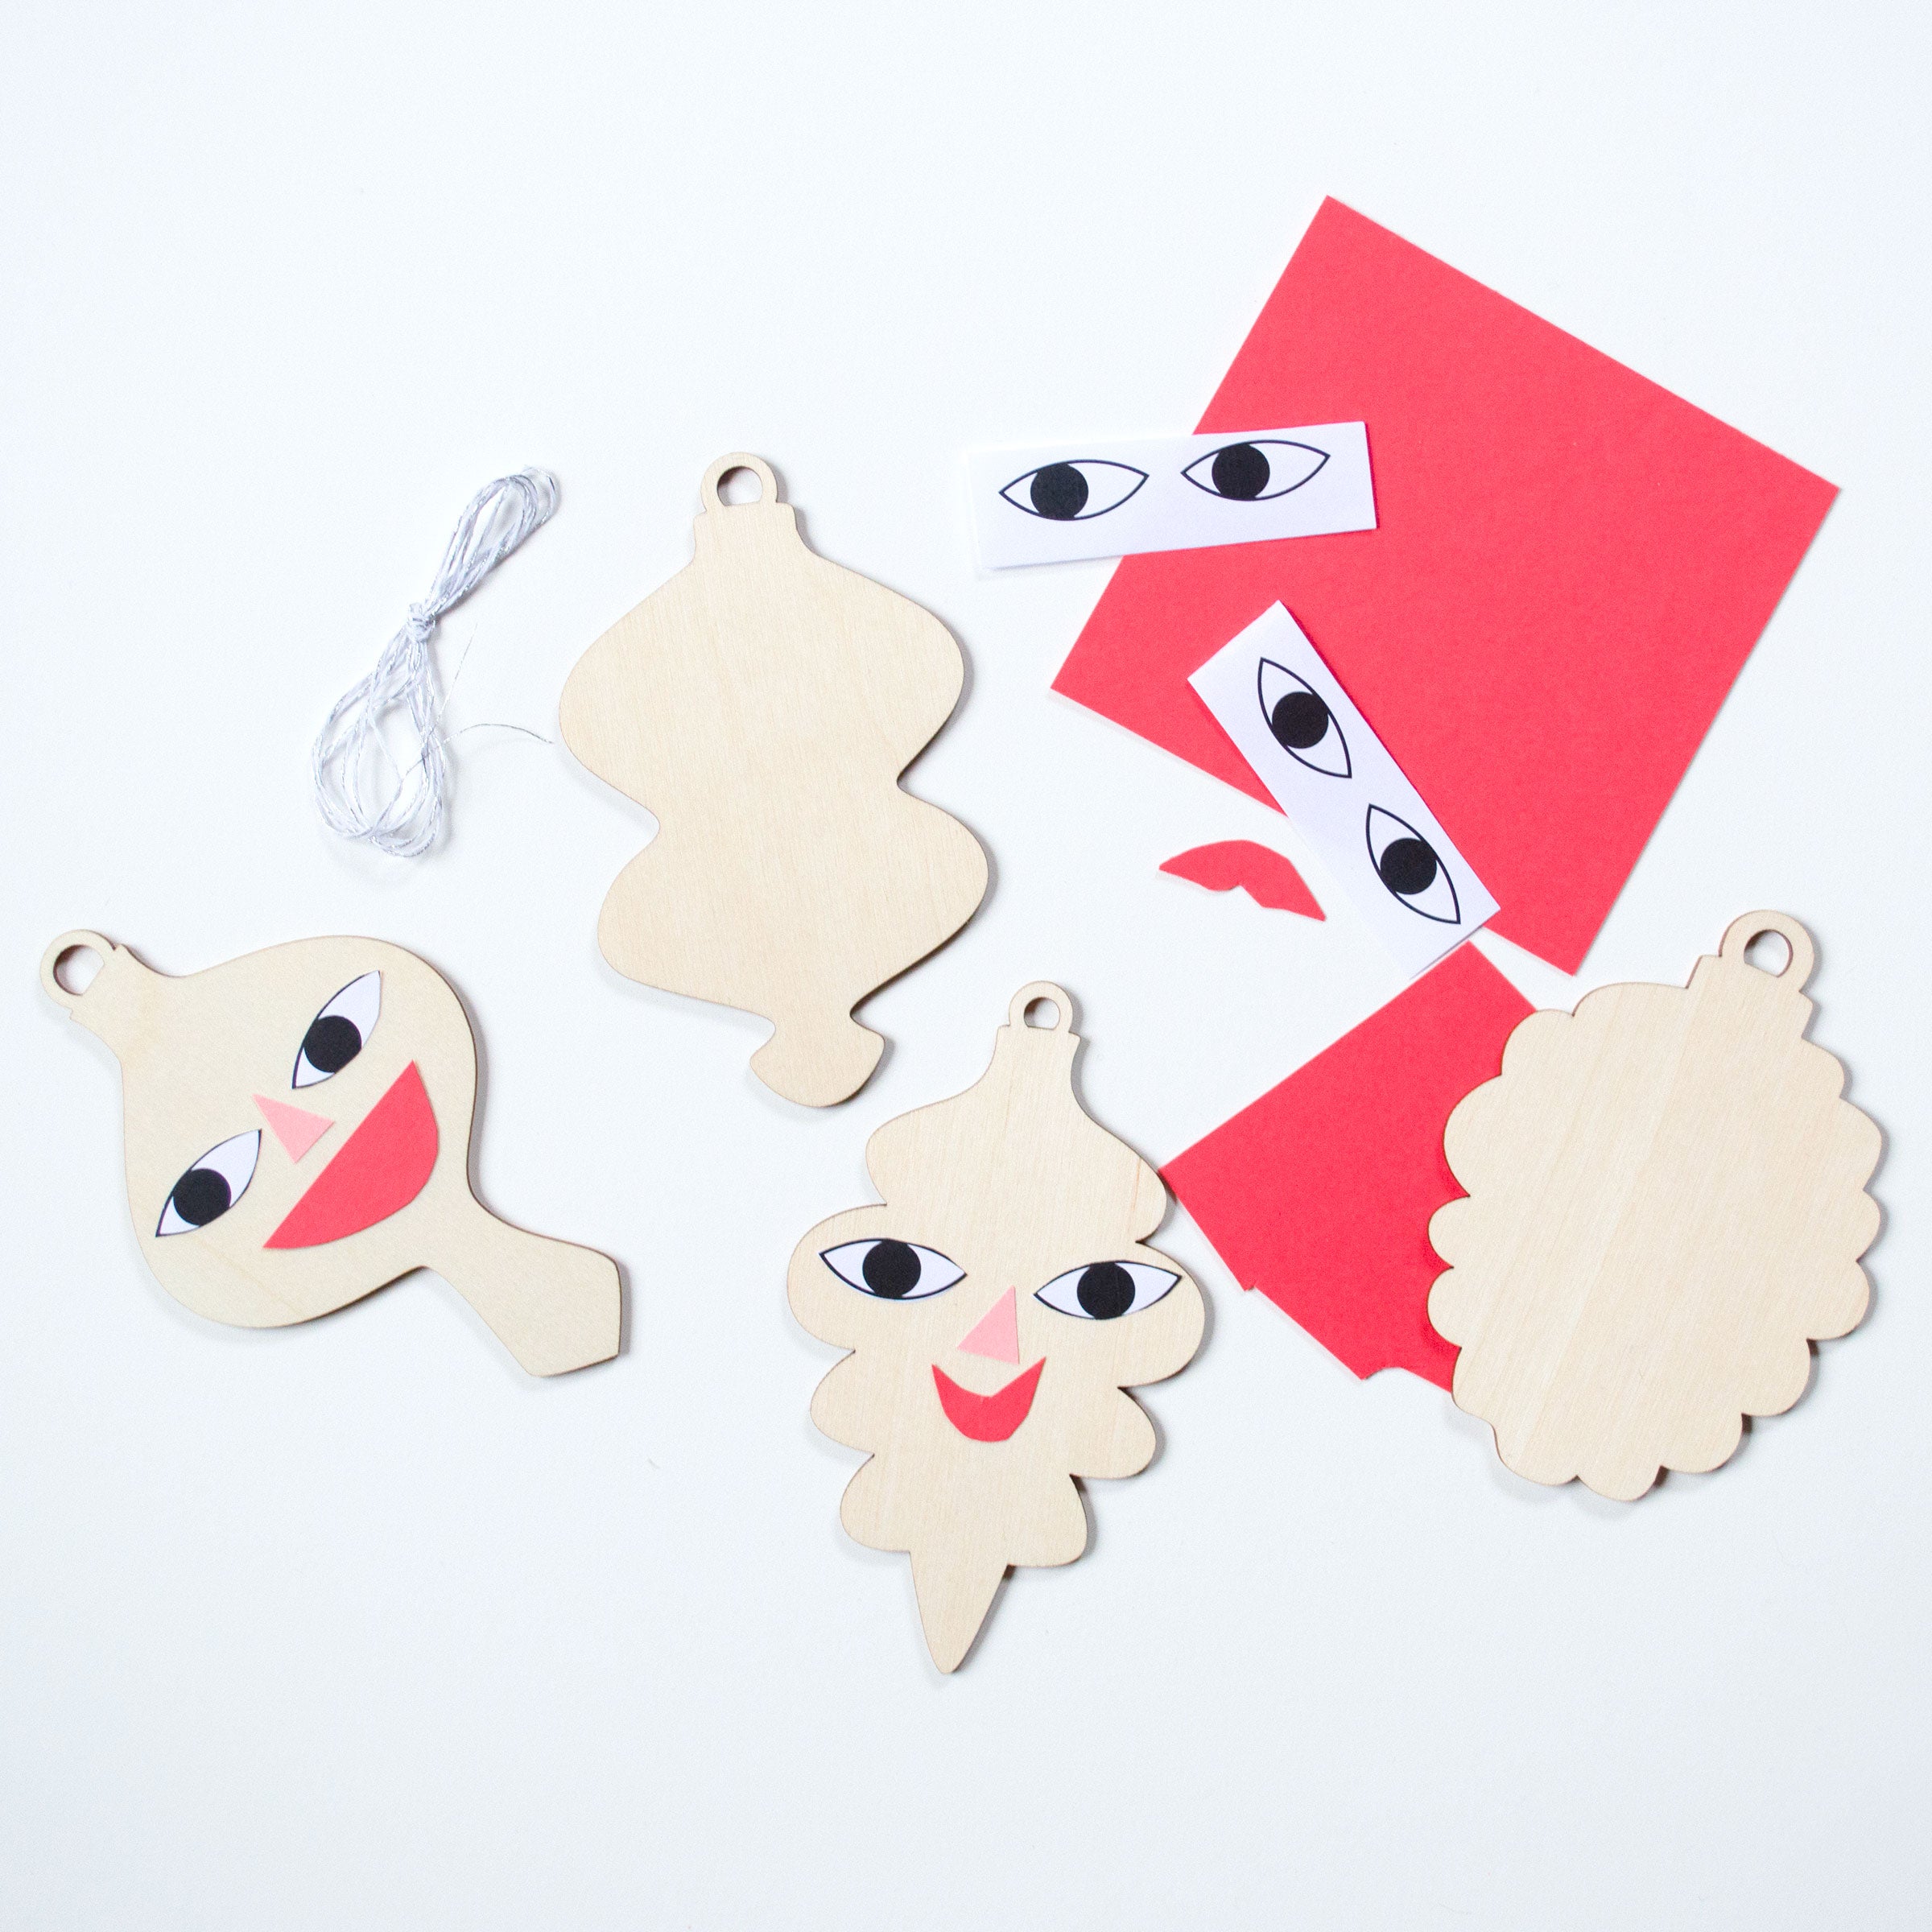 kits for decoration wooden Christmas tree ornaments with faces